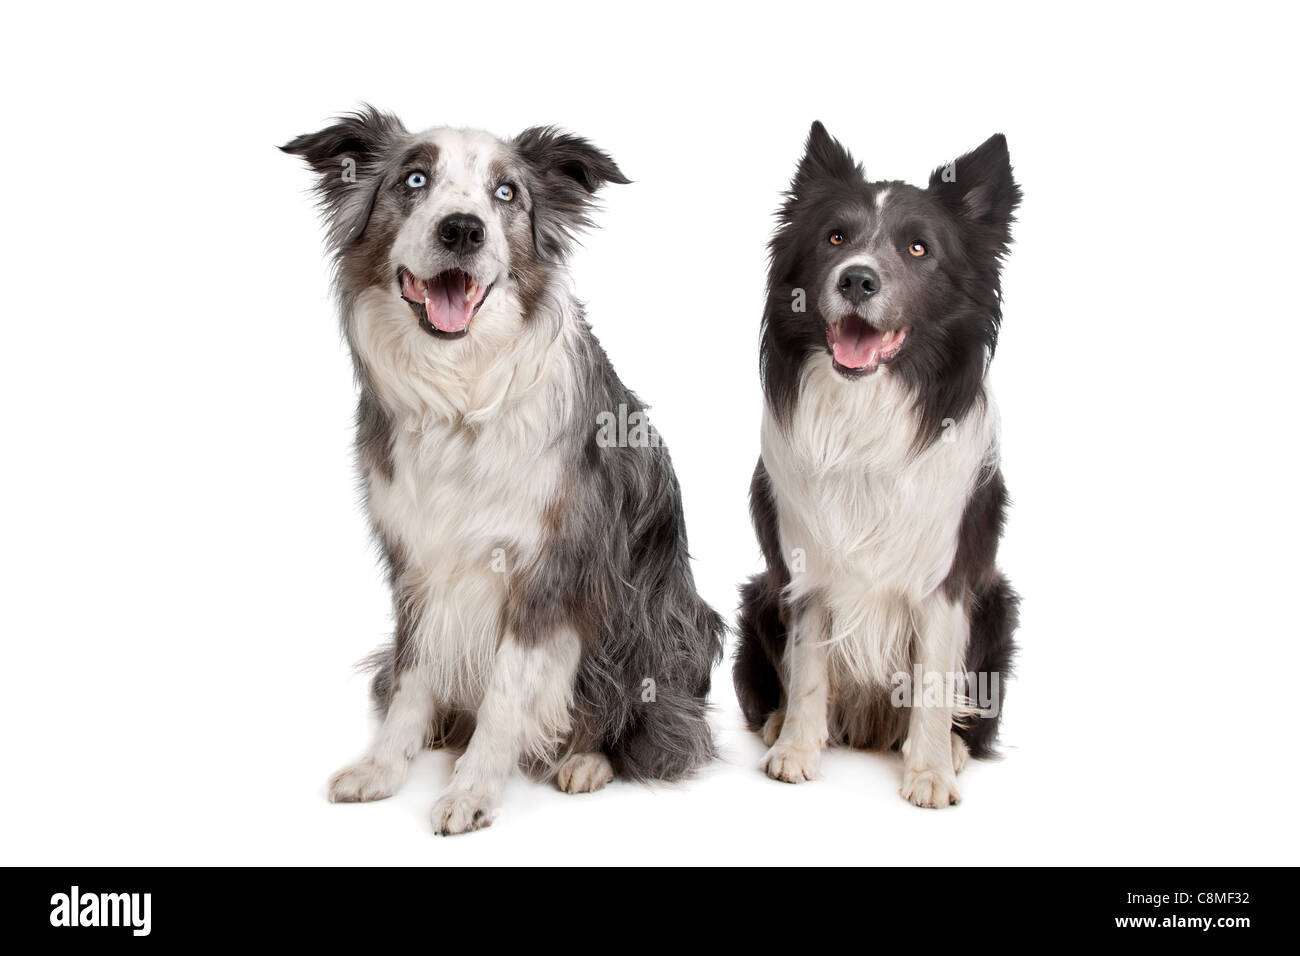 Border Collie and Australian Shepherd in front of a white background Stock Photo